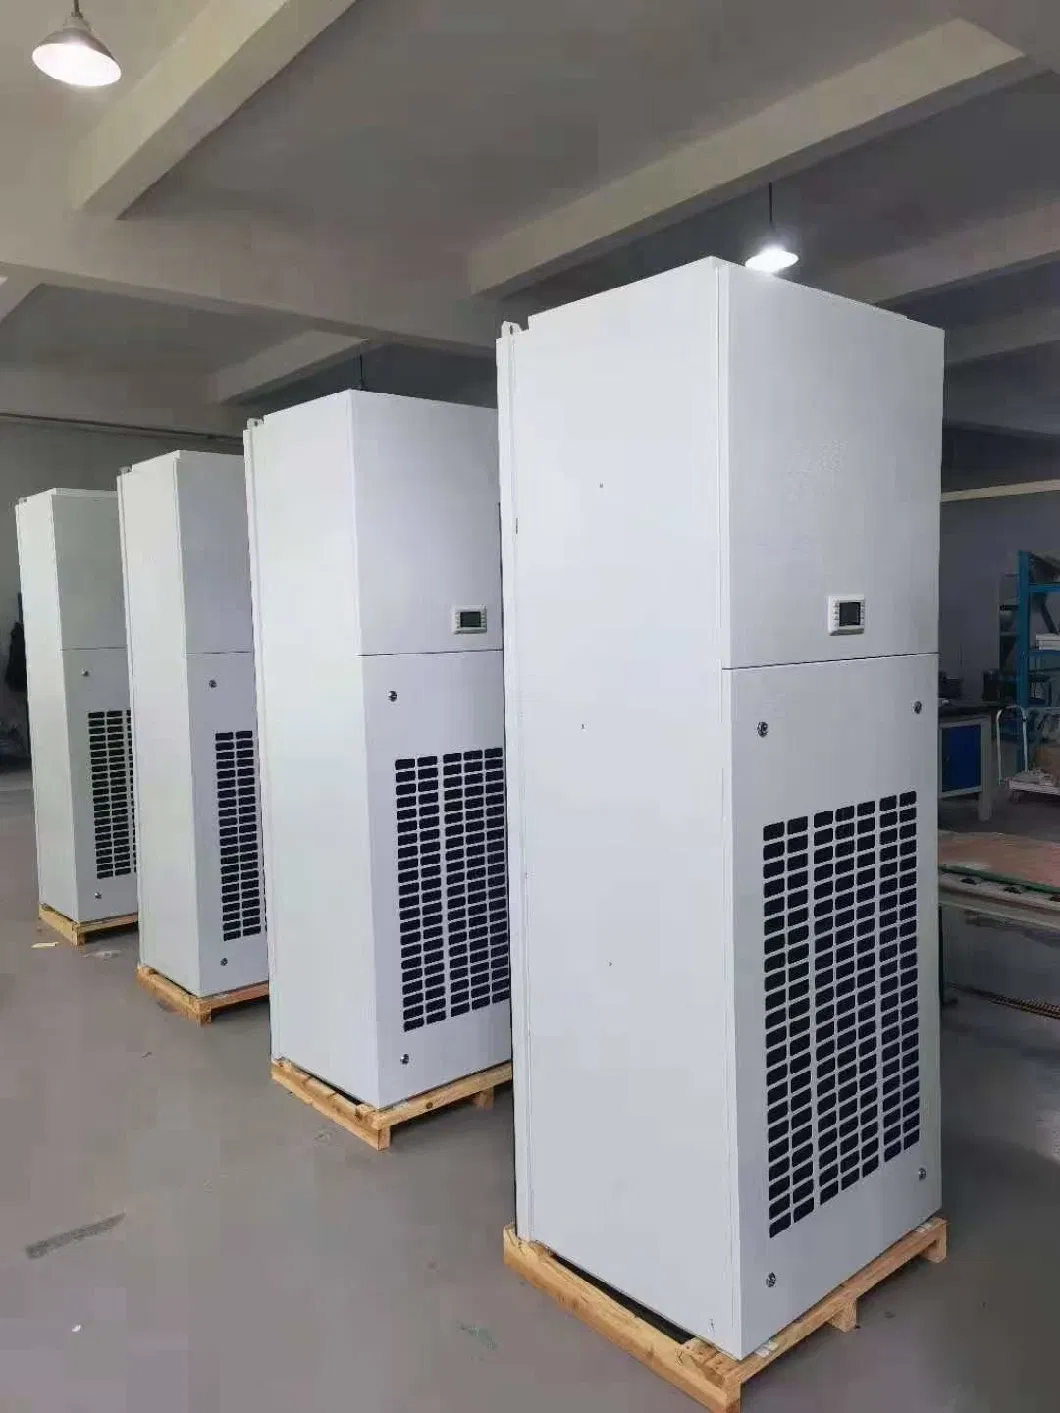 Hisrup energy Storage System Container Air Contioner